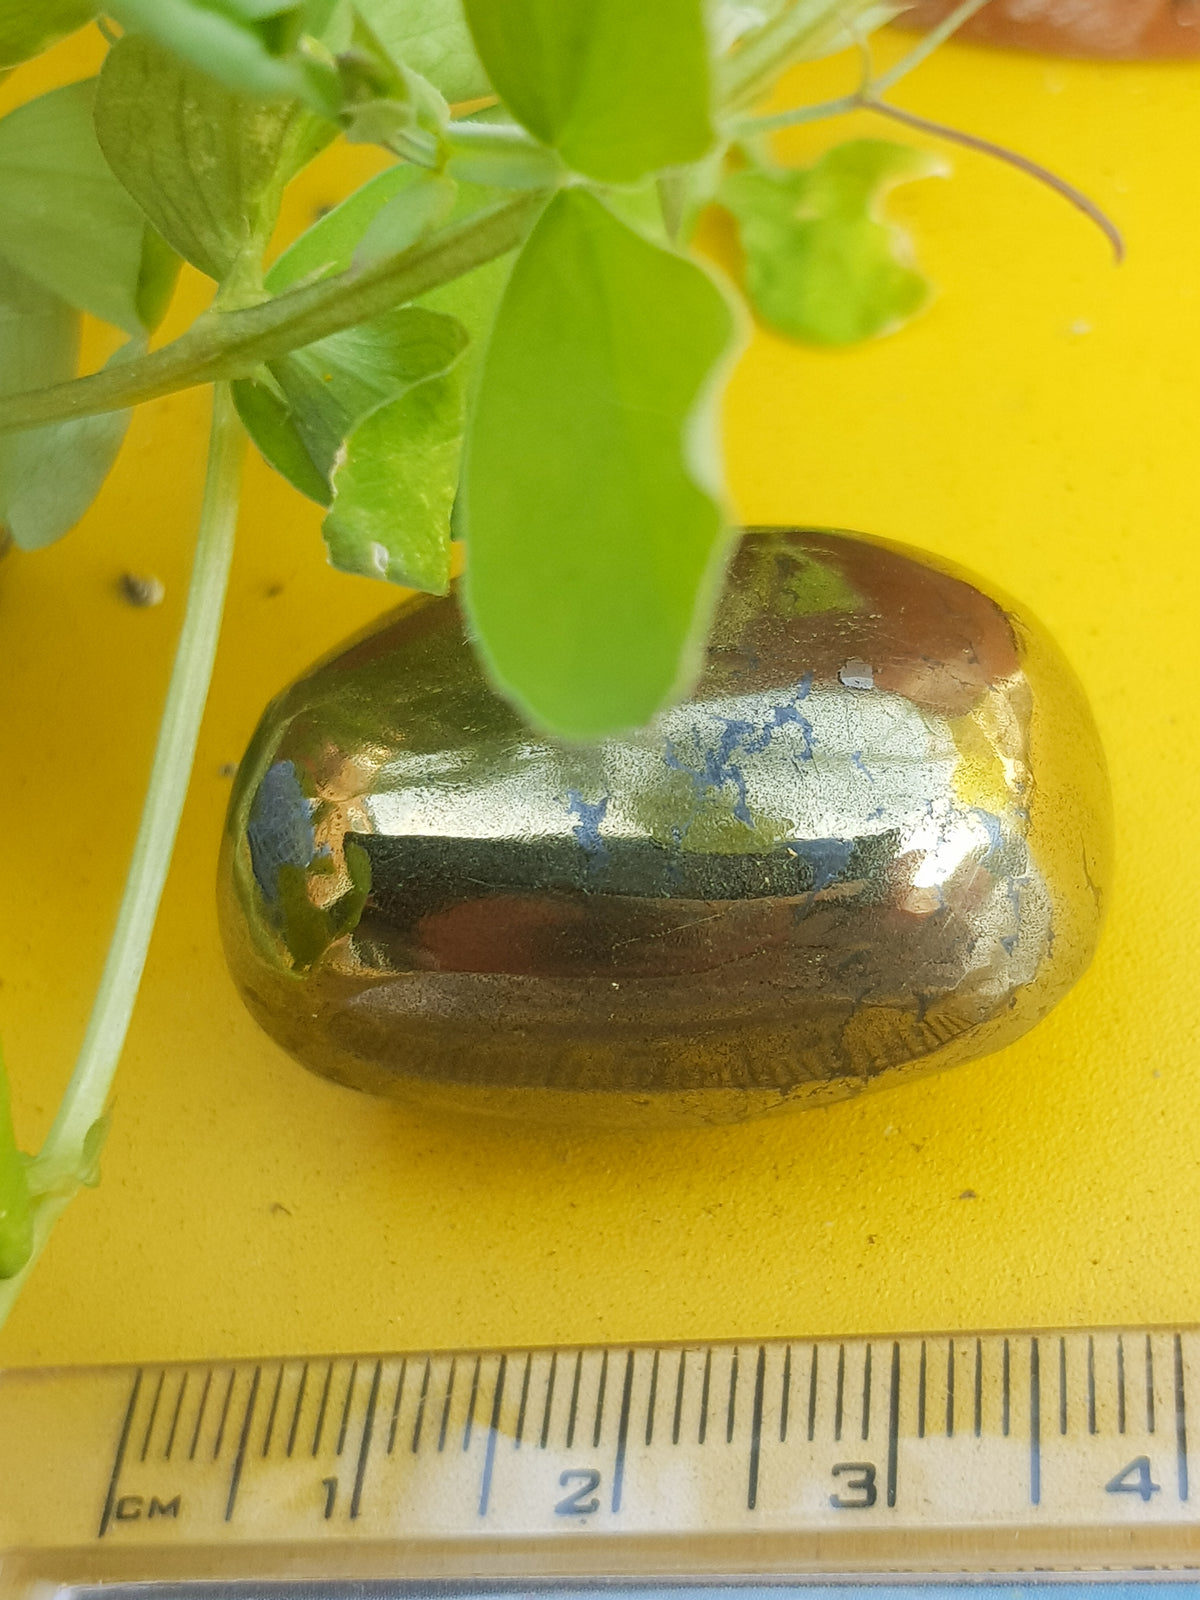 polished chalcopyrite pebble next to a ruler for scale. It is 3.5cm long